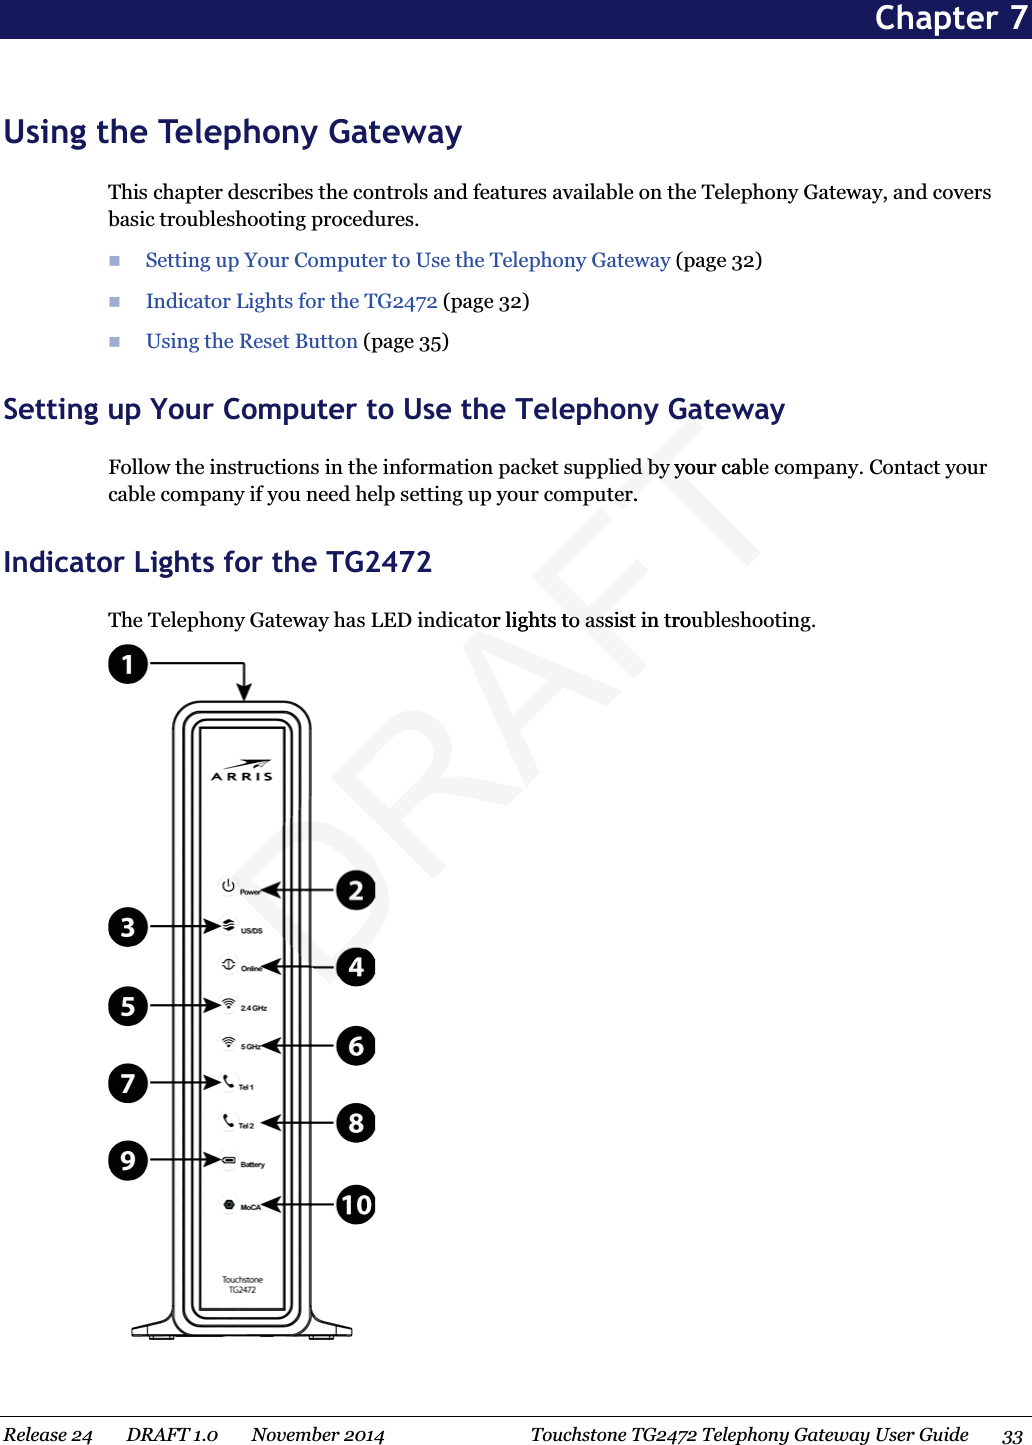  Chapter 7 Using the Telephony Gateway This chapter describes the controls and features available on the Telephony Gateway, and covers basic troubleshooting procedures.  Setting upYour Computer to Use the Telephony Gateway (page 32)  Indicator Lights for the TG2472 (page 32)  Using the Reset Button (page 35)   Setting up Your Computer to Use the Telephony Gateway Follow the instructions in the information packet supplied by your cable company. Contact your cable company if you need help setting up your computer.   Indicator Lights for the TG2472 The Telephony Gateway has LED indicator lights to assist in troubleshooting.  Release 24    DRAFT 1.0    November 2014  Touchstone TG2472 Telephony Gateway User Guide    33  DRAFTGaGaed by your cabled by youter.ter.tor lights to assist in troutor lights to ass